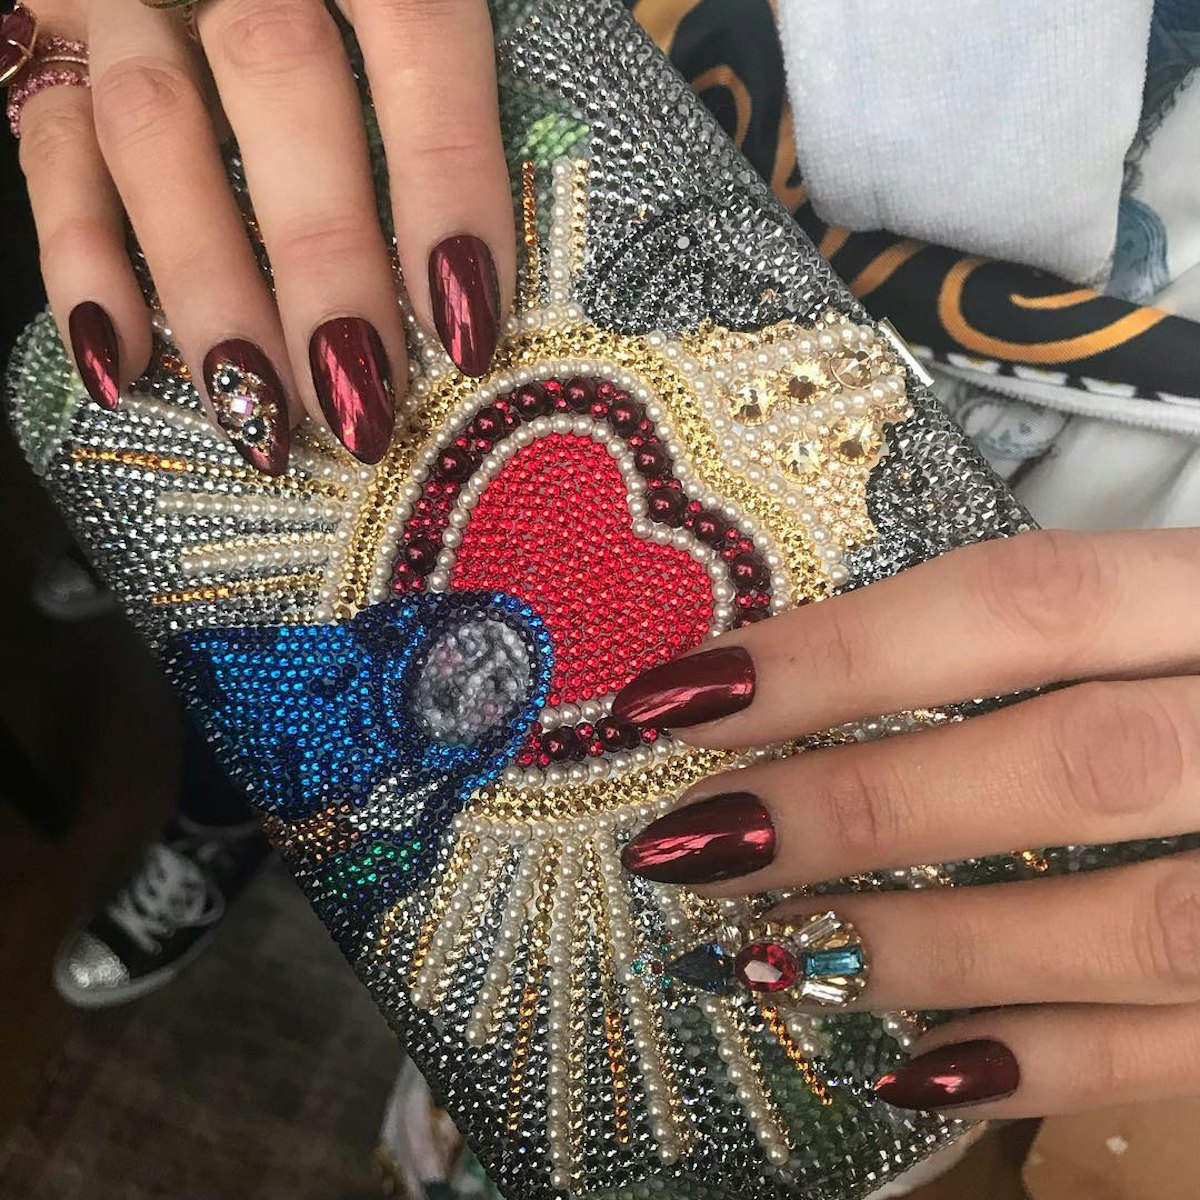 In 2018, Blake Lively turned heads at the Met Gala with her regal gown and stained glass-inspired na...